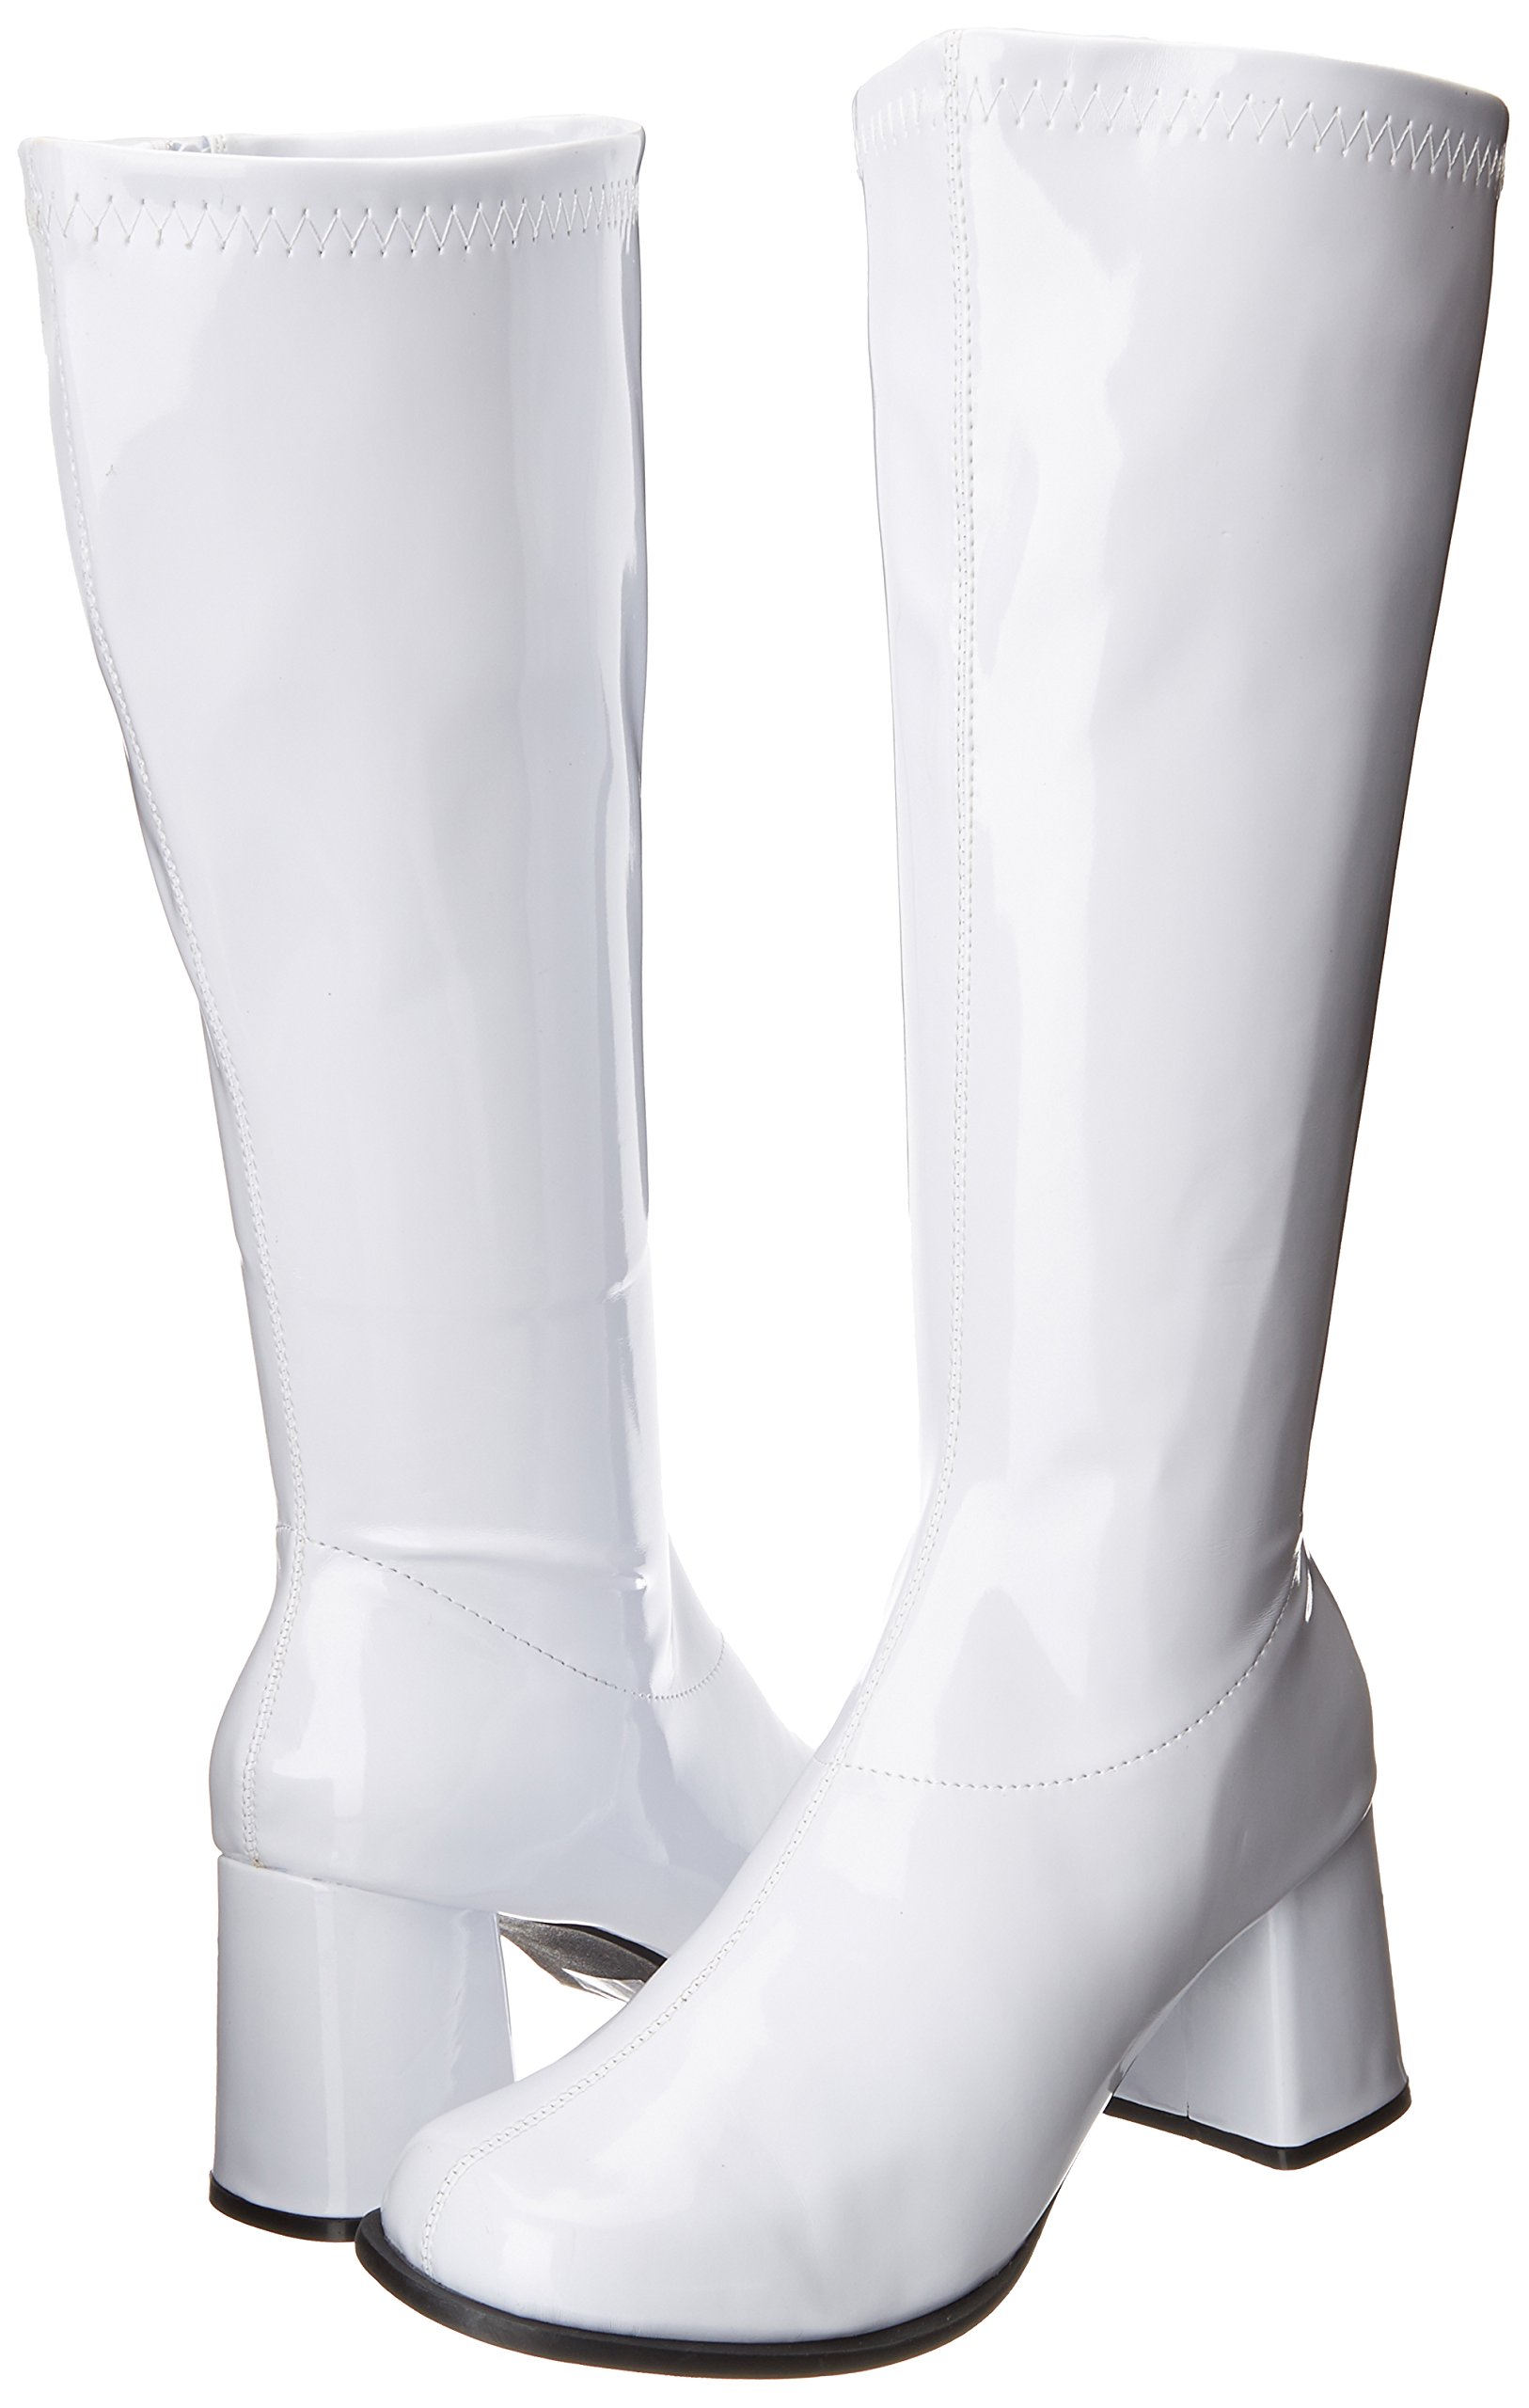 Ellie Shoes Women's Knee High Boot